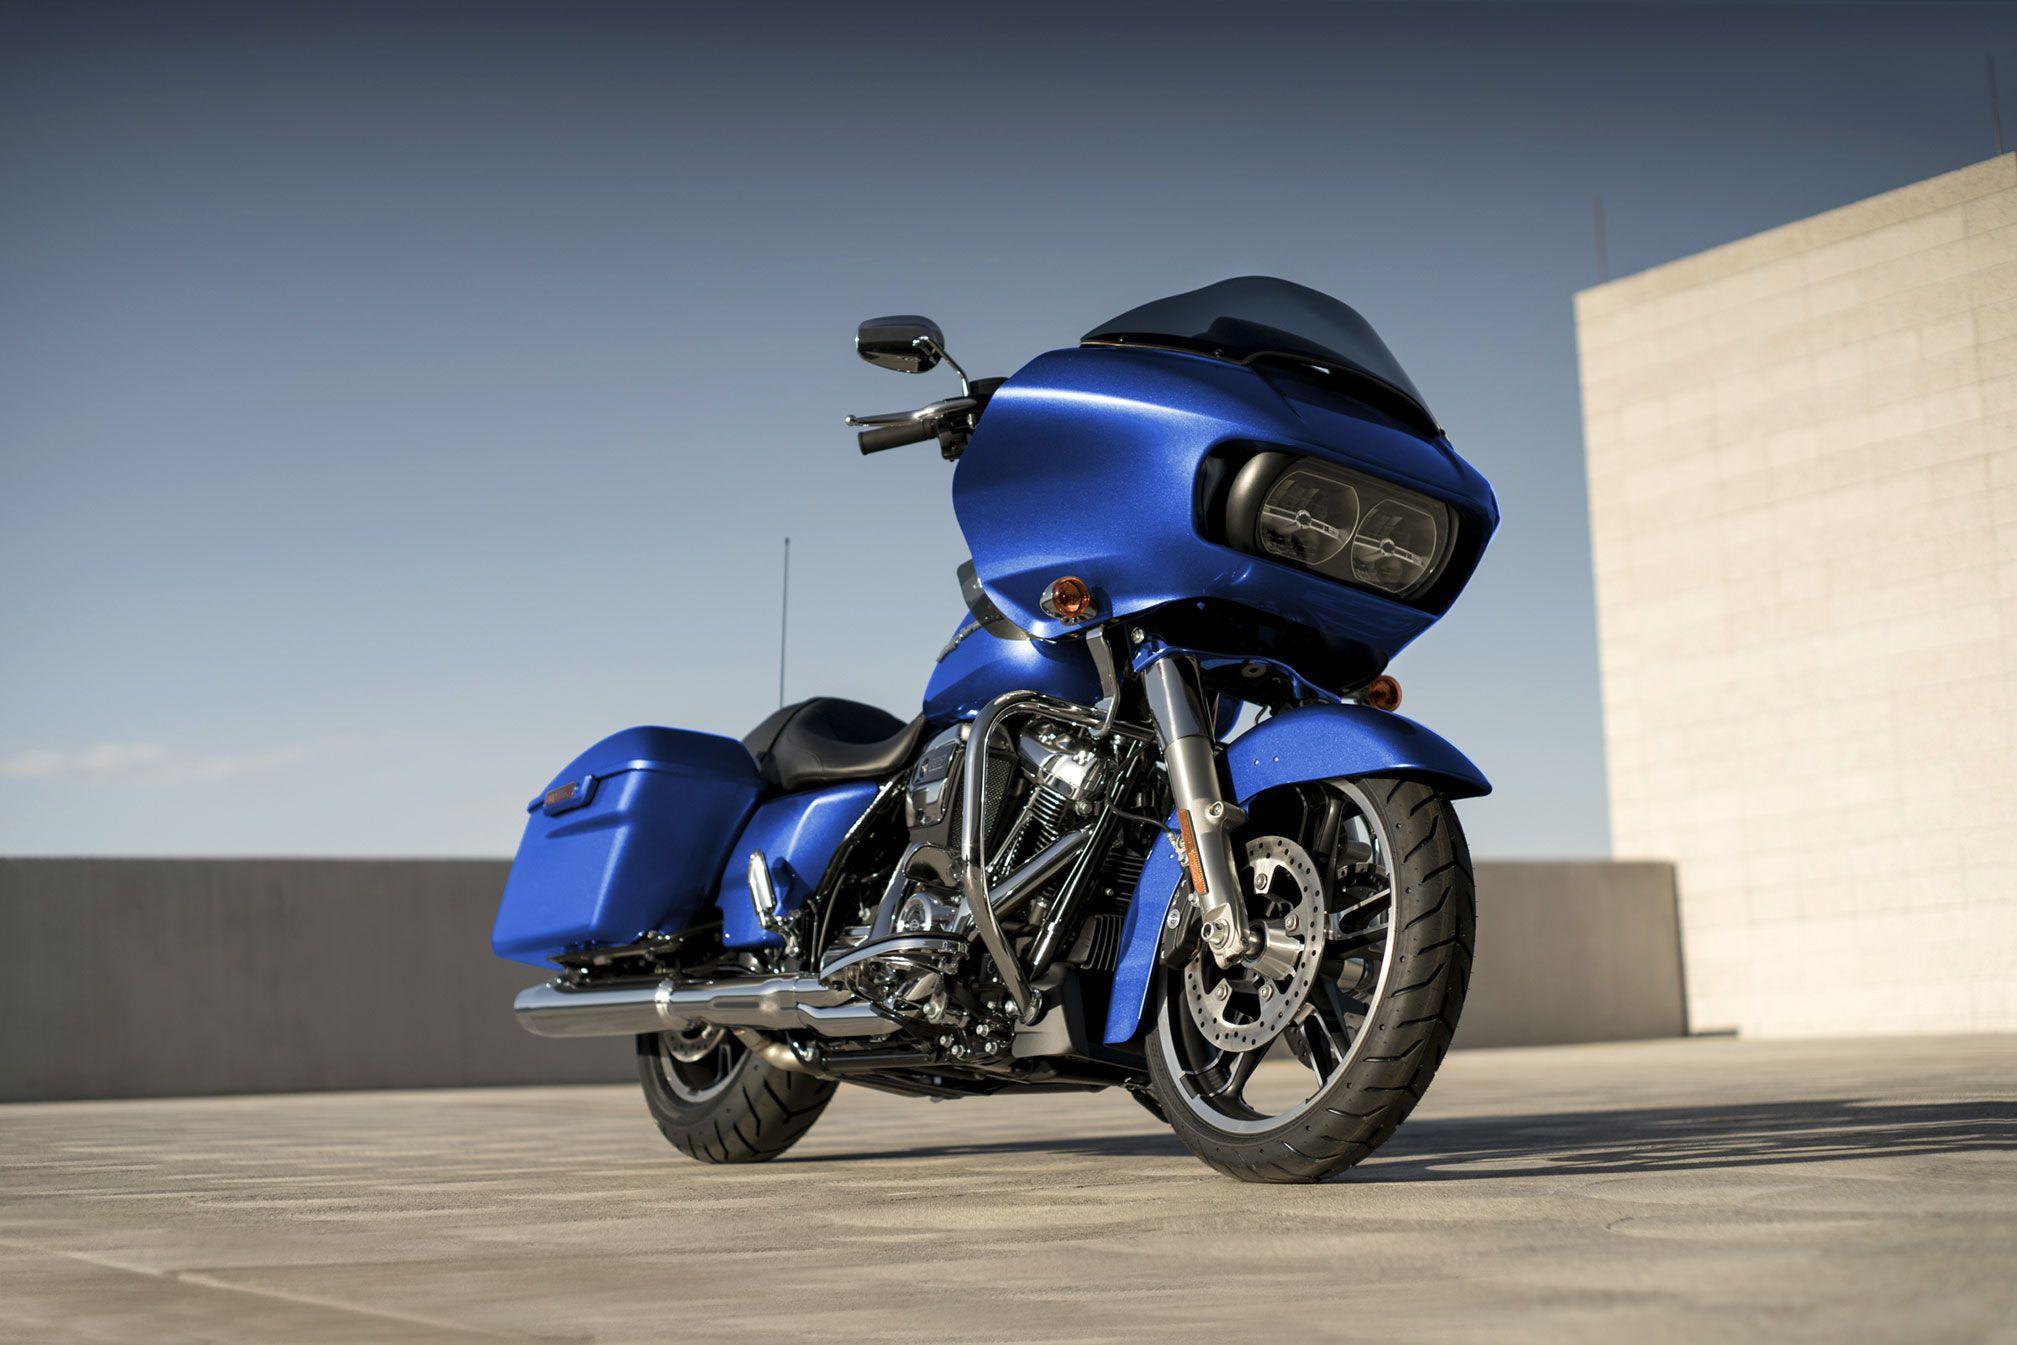 Harley Davidson Road Glide Full HD Wallpaper And Background